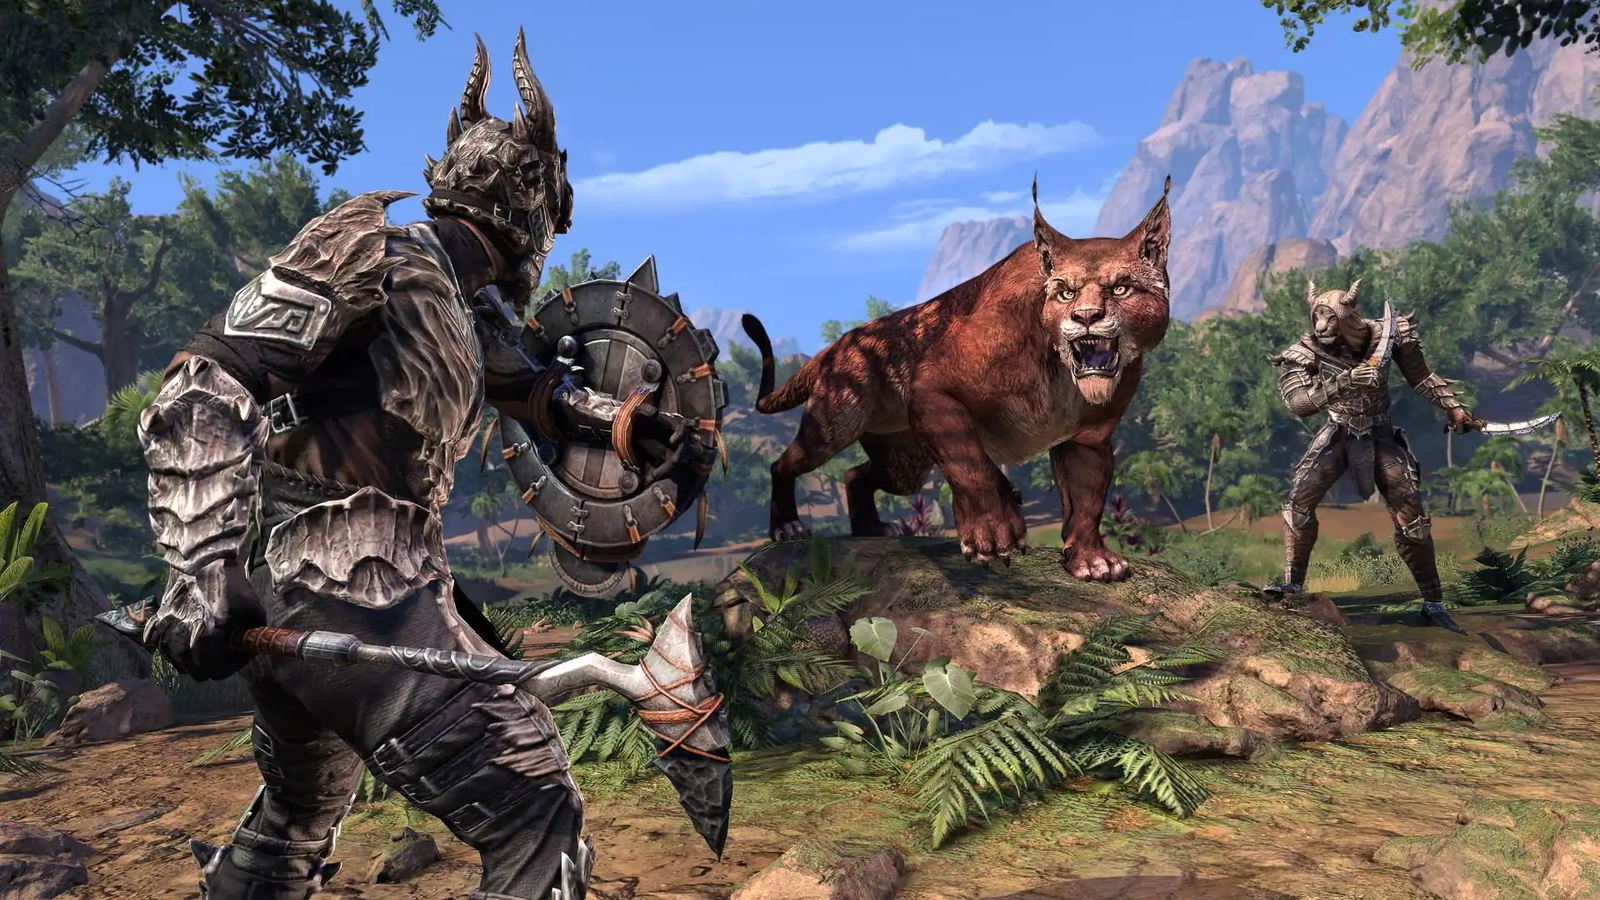 Elder Scrolls 6 Will Keep People Playing For 'At Least' 10 Years